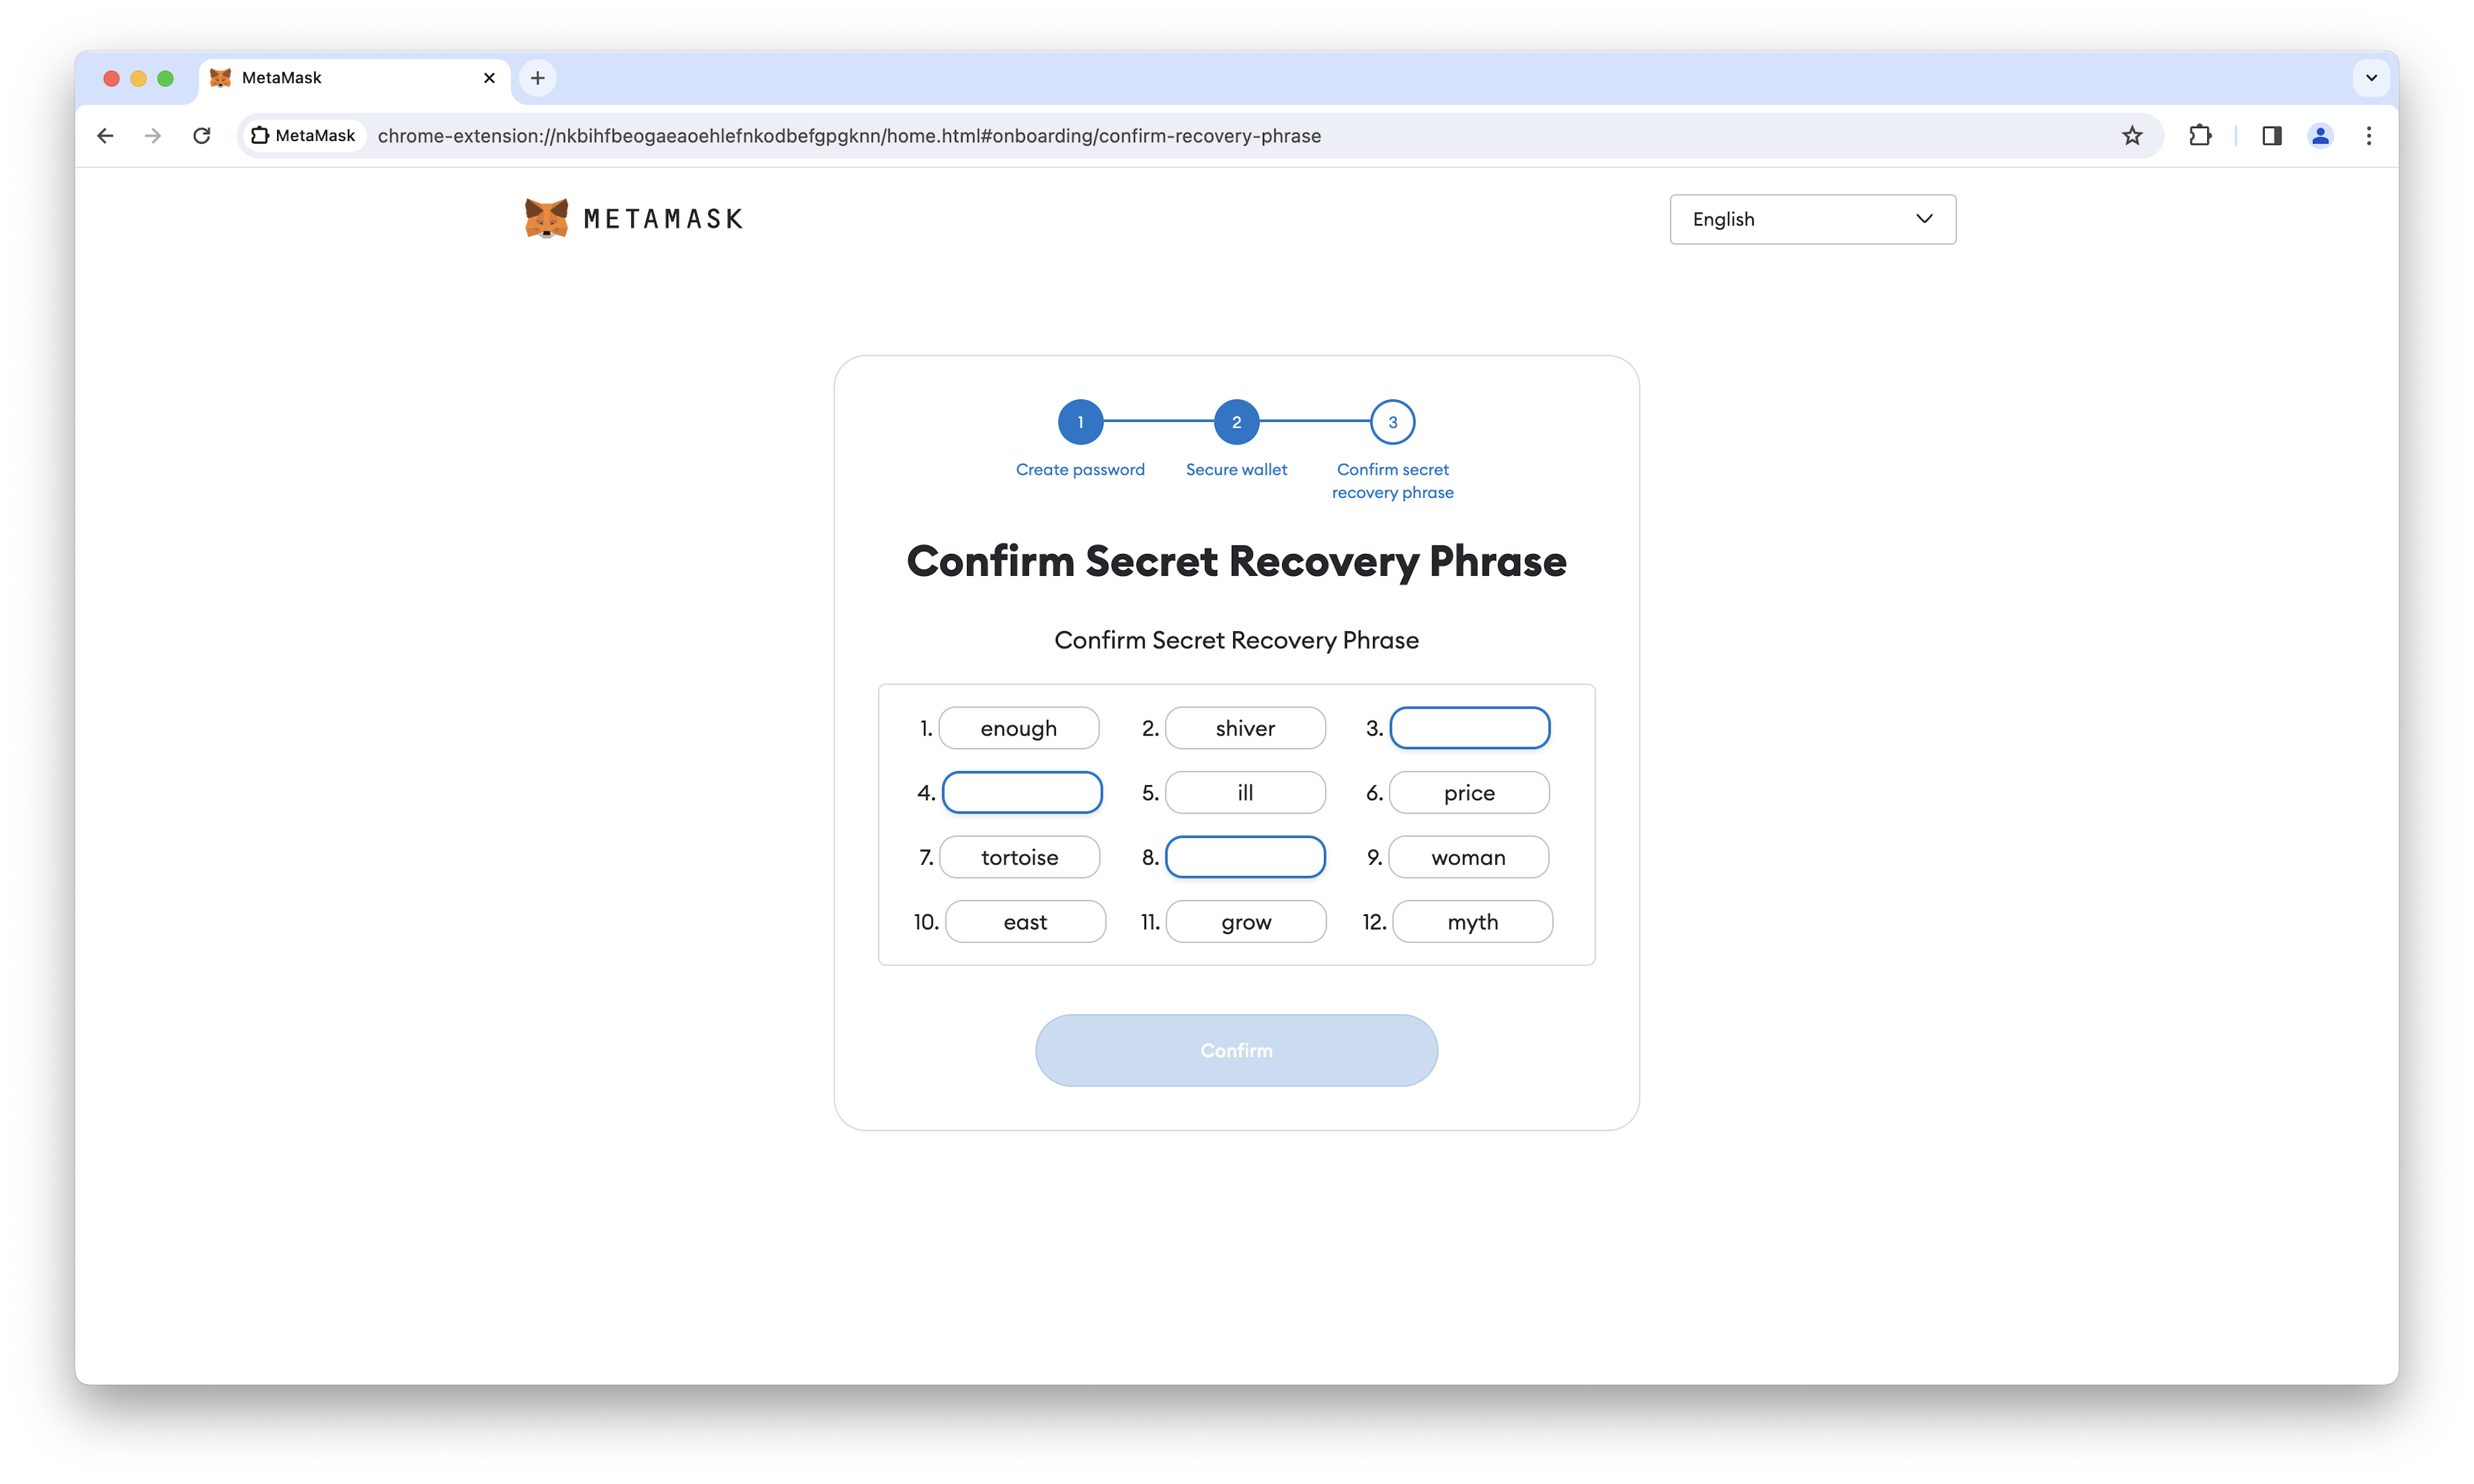 MetaMask recovery confirmation page.